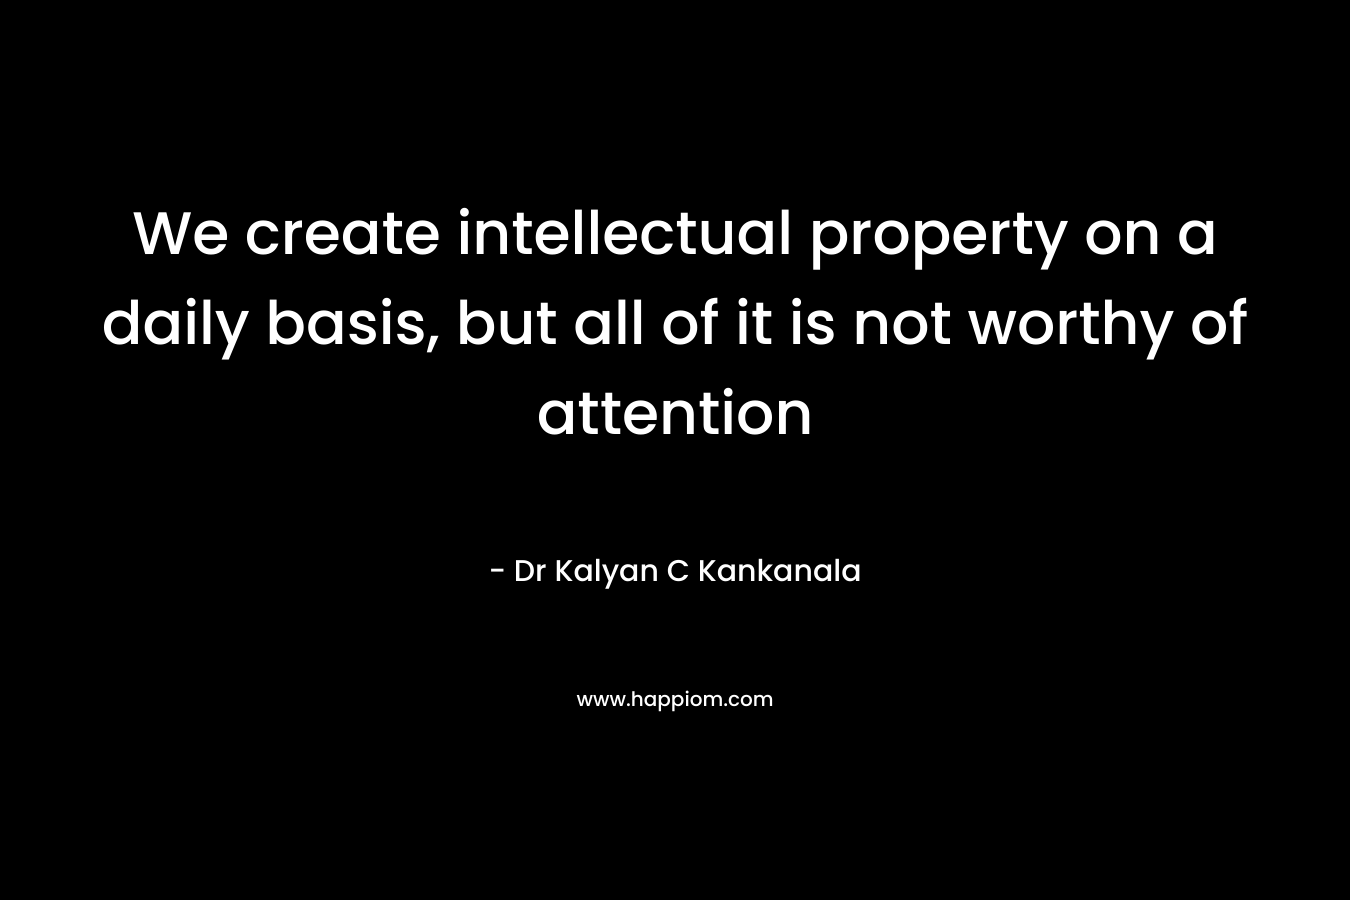 We create intellectual property on a daily basis, but all of it is not worthy of attention – Dr Kalyan C Kankanala